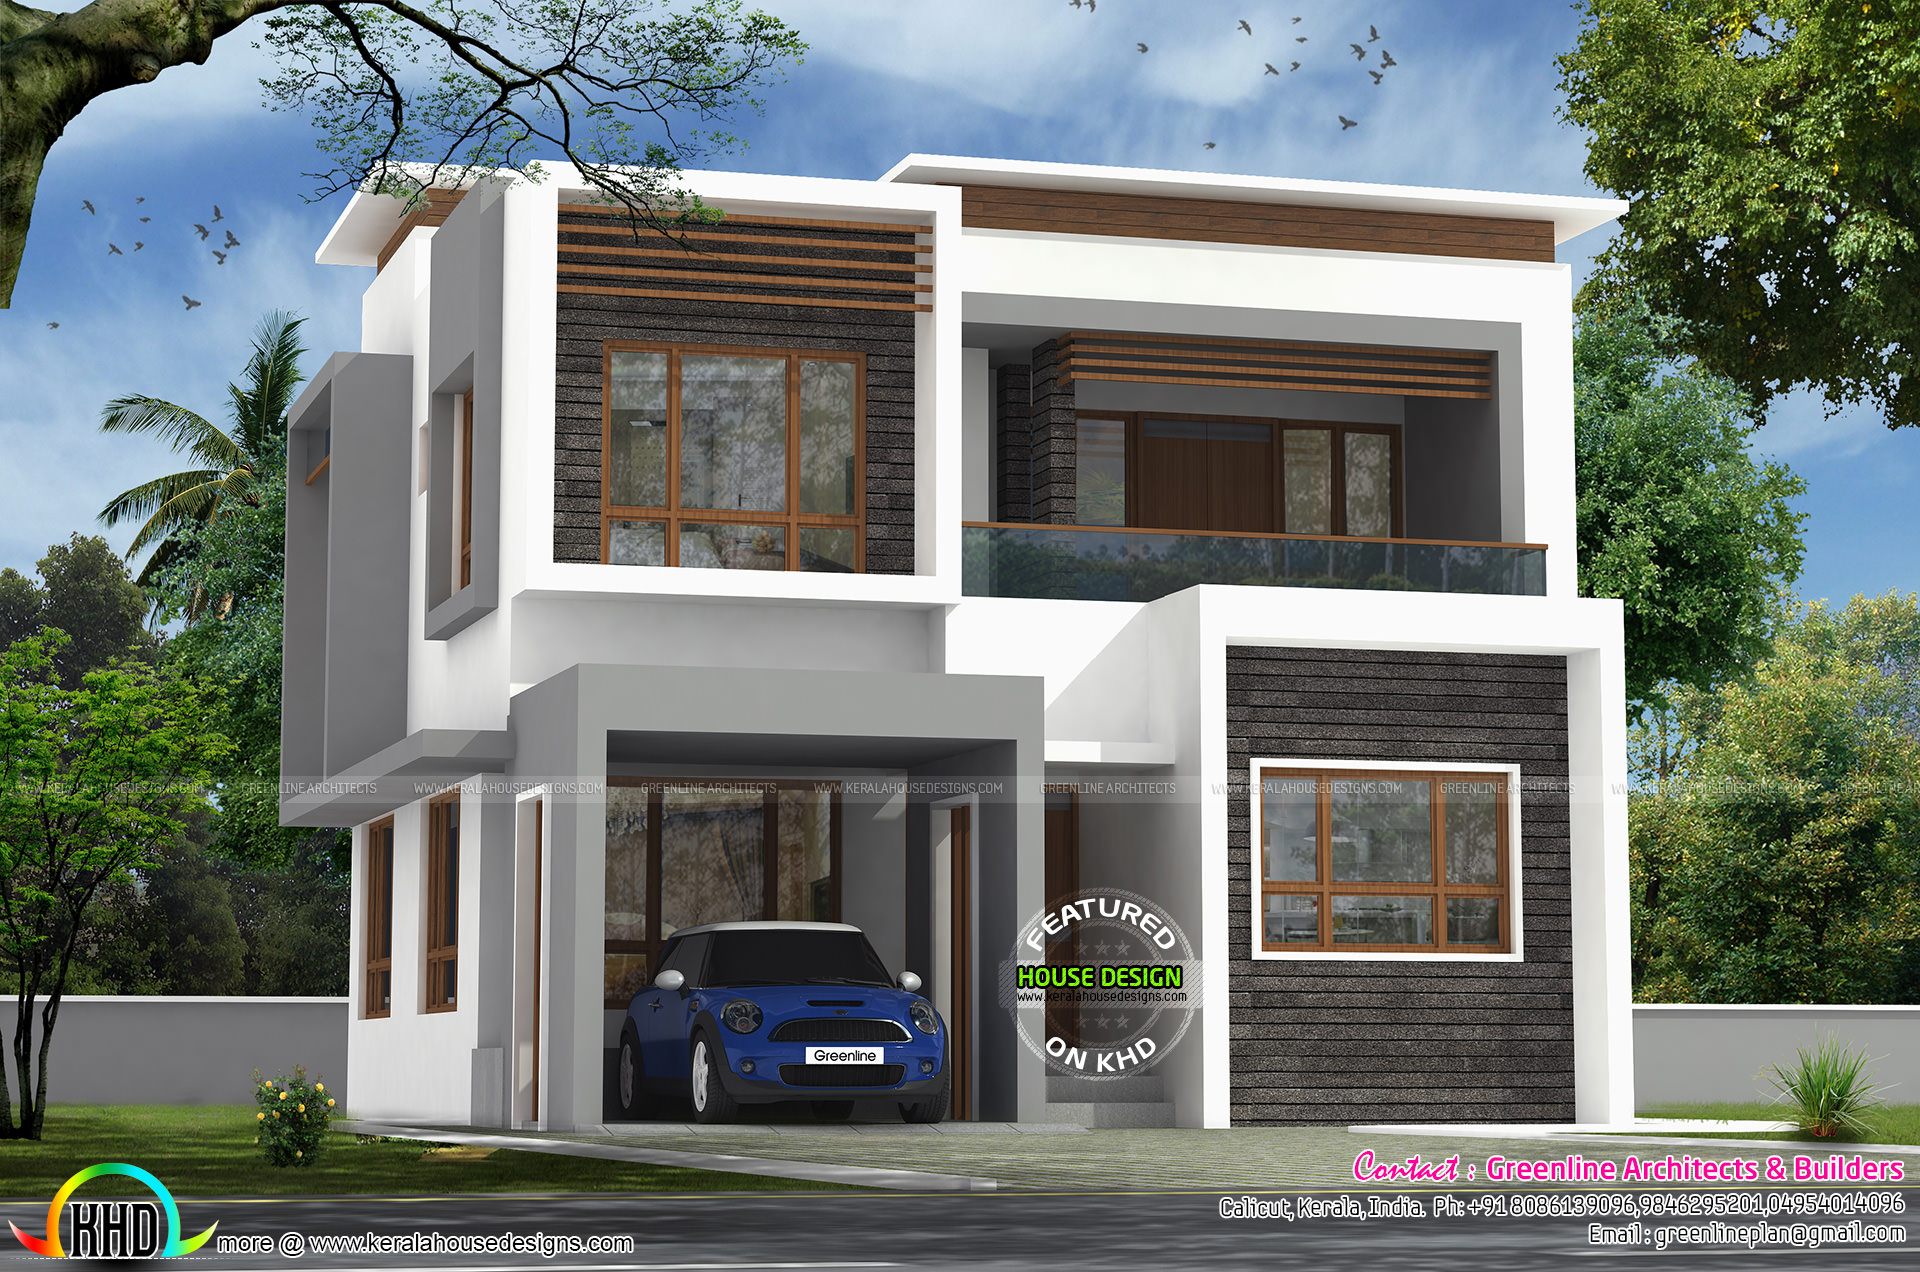 3 bedroom 40x50 modern house architecture - Kerala home design and